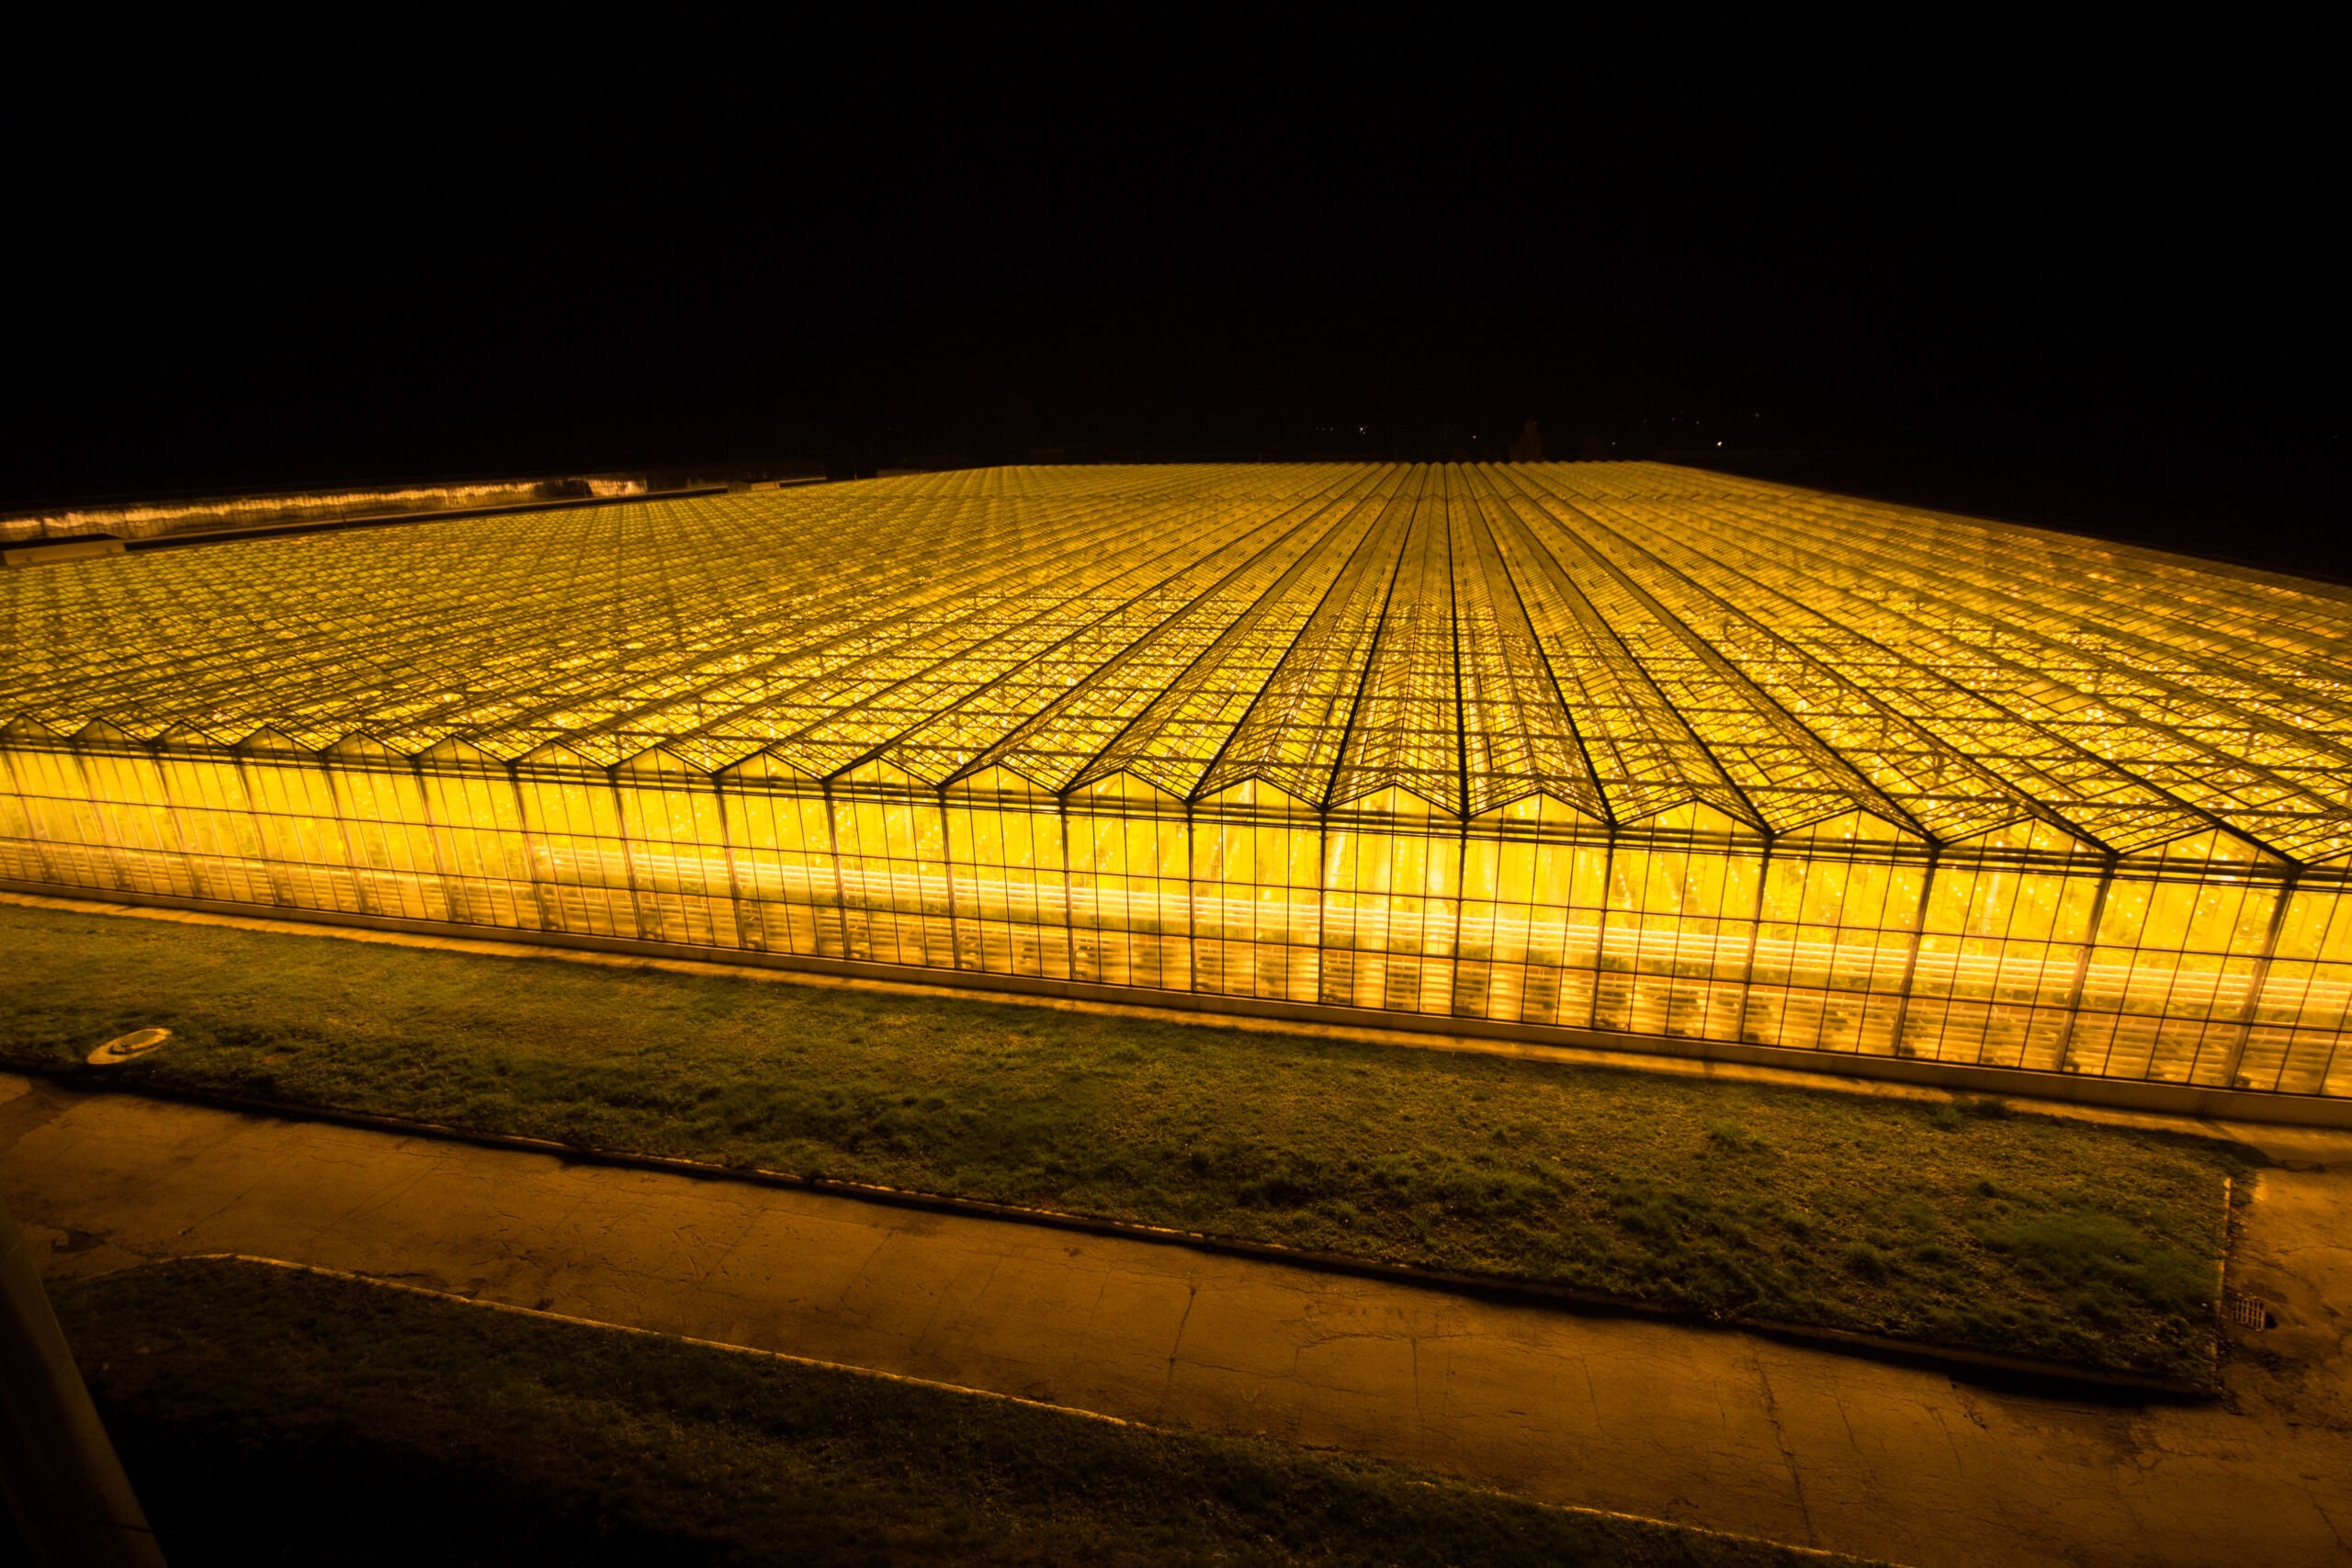 https://darksky.org/app/uploads/2023/04/greenhouses-Industrial-size-greenhouse-operations-can-emit-enormous-amounts-of-light-pollution.-Credit-Alexandr-Bochkarev-shutterstock_1723240186-scaled.jpg